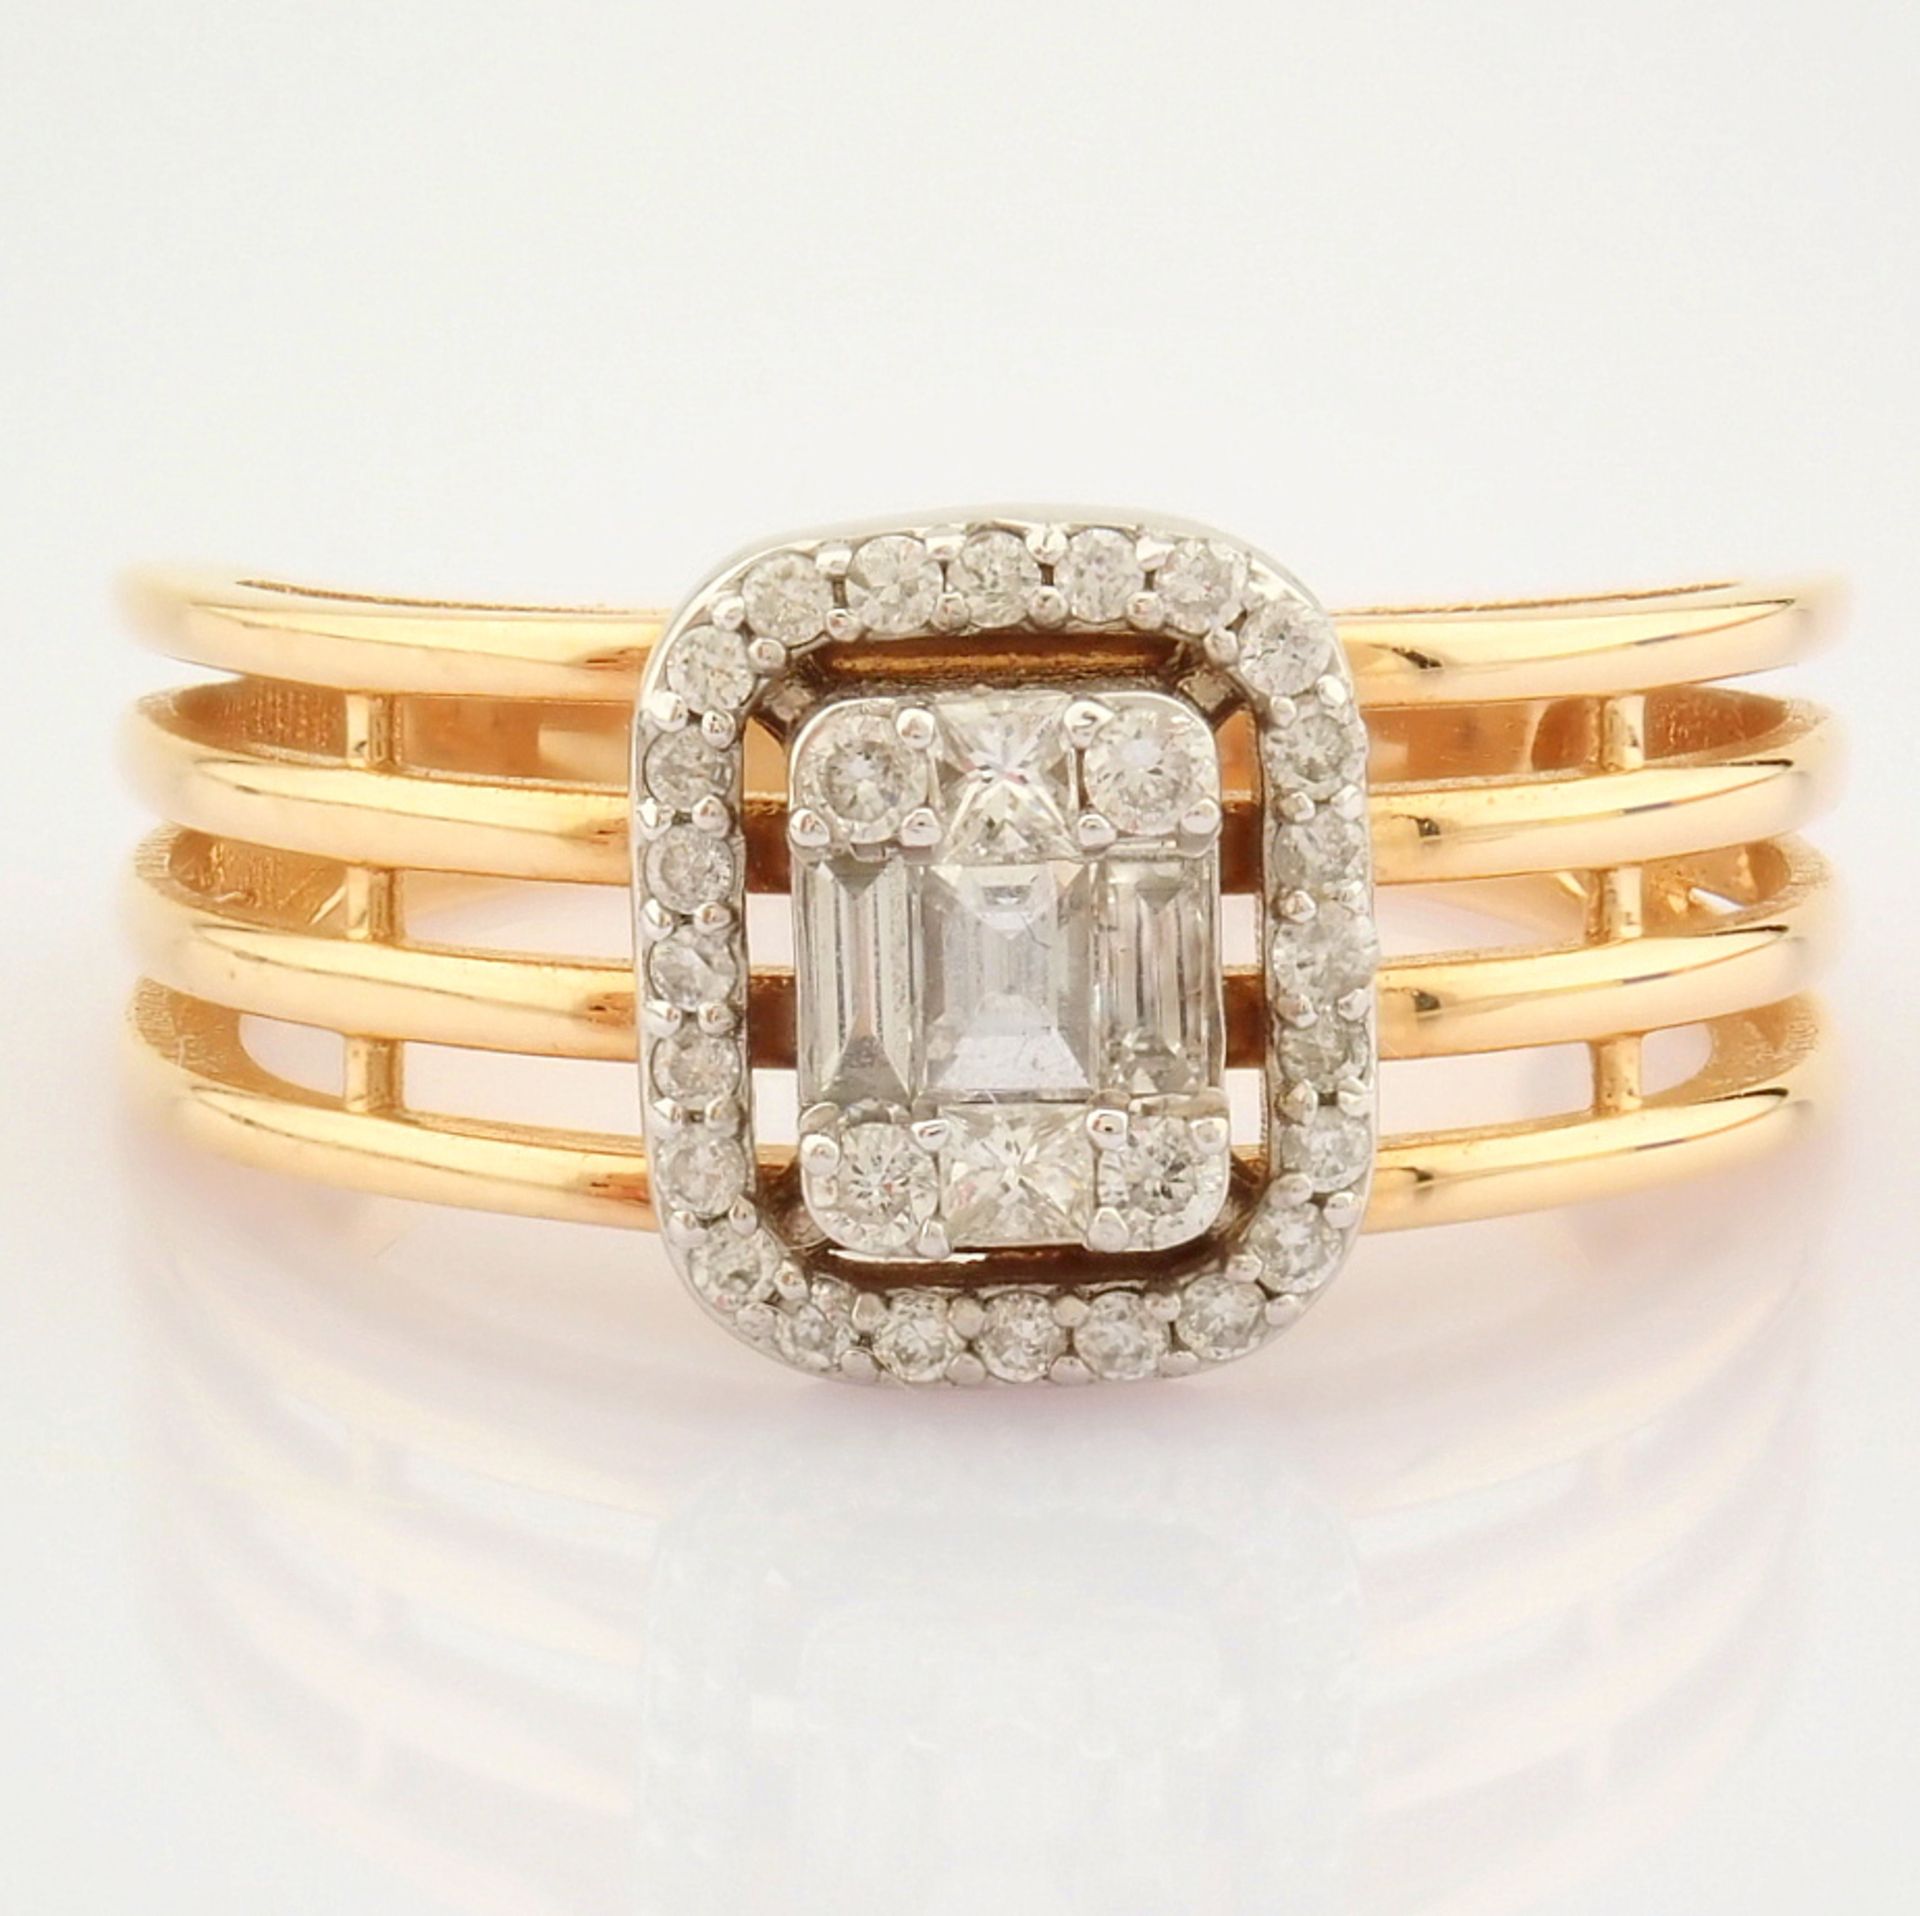 Certificated 14K White and Rose Gold Baguette Diamond & Diamond Ring (Total 0.31 ct Stone) - Image 3 of 6